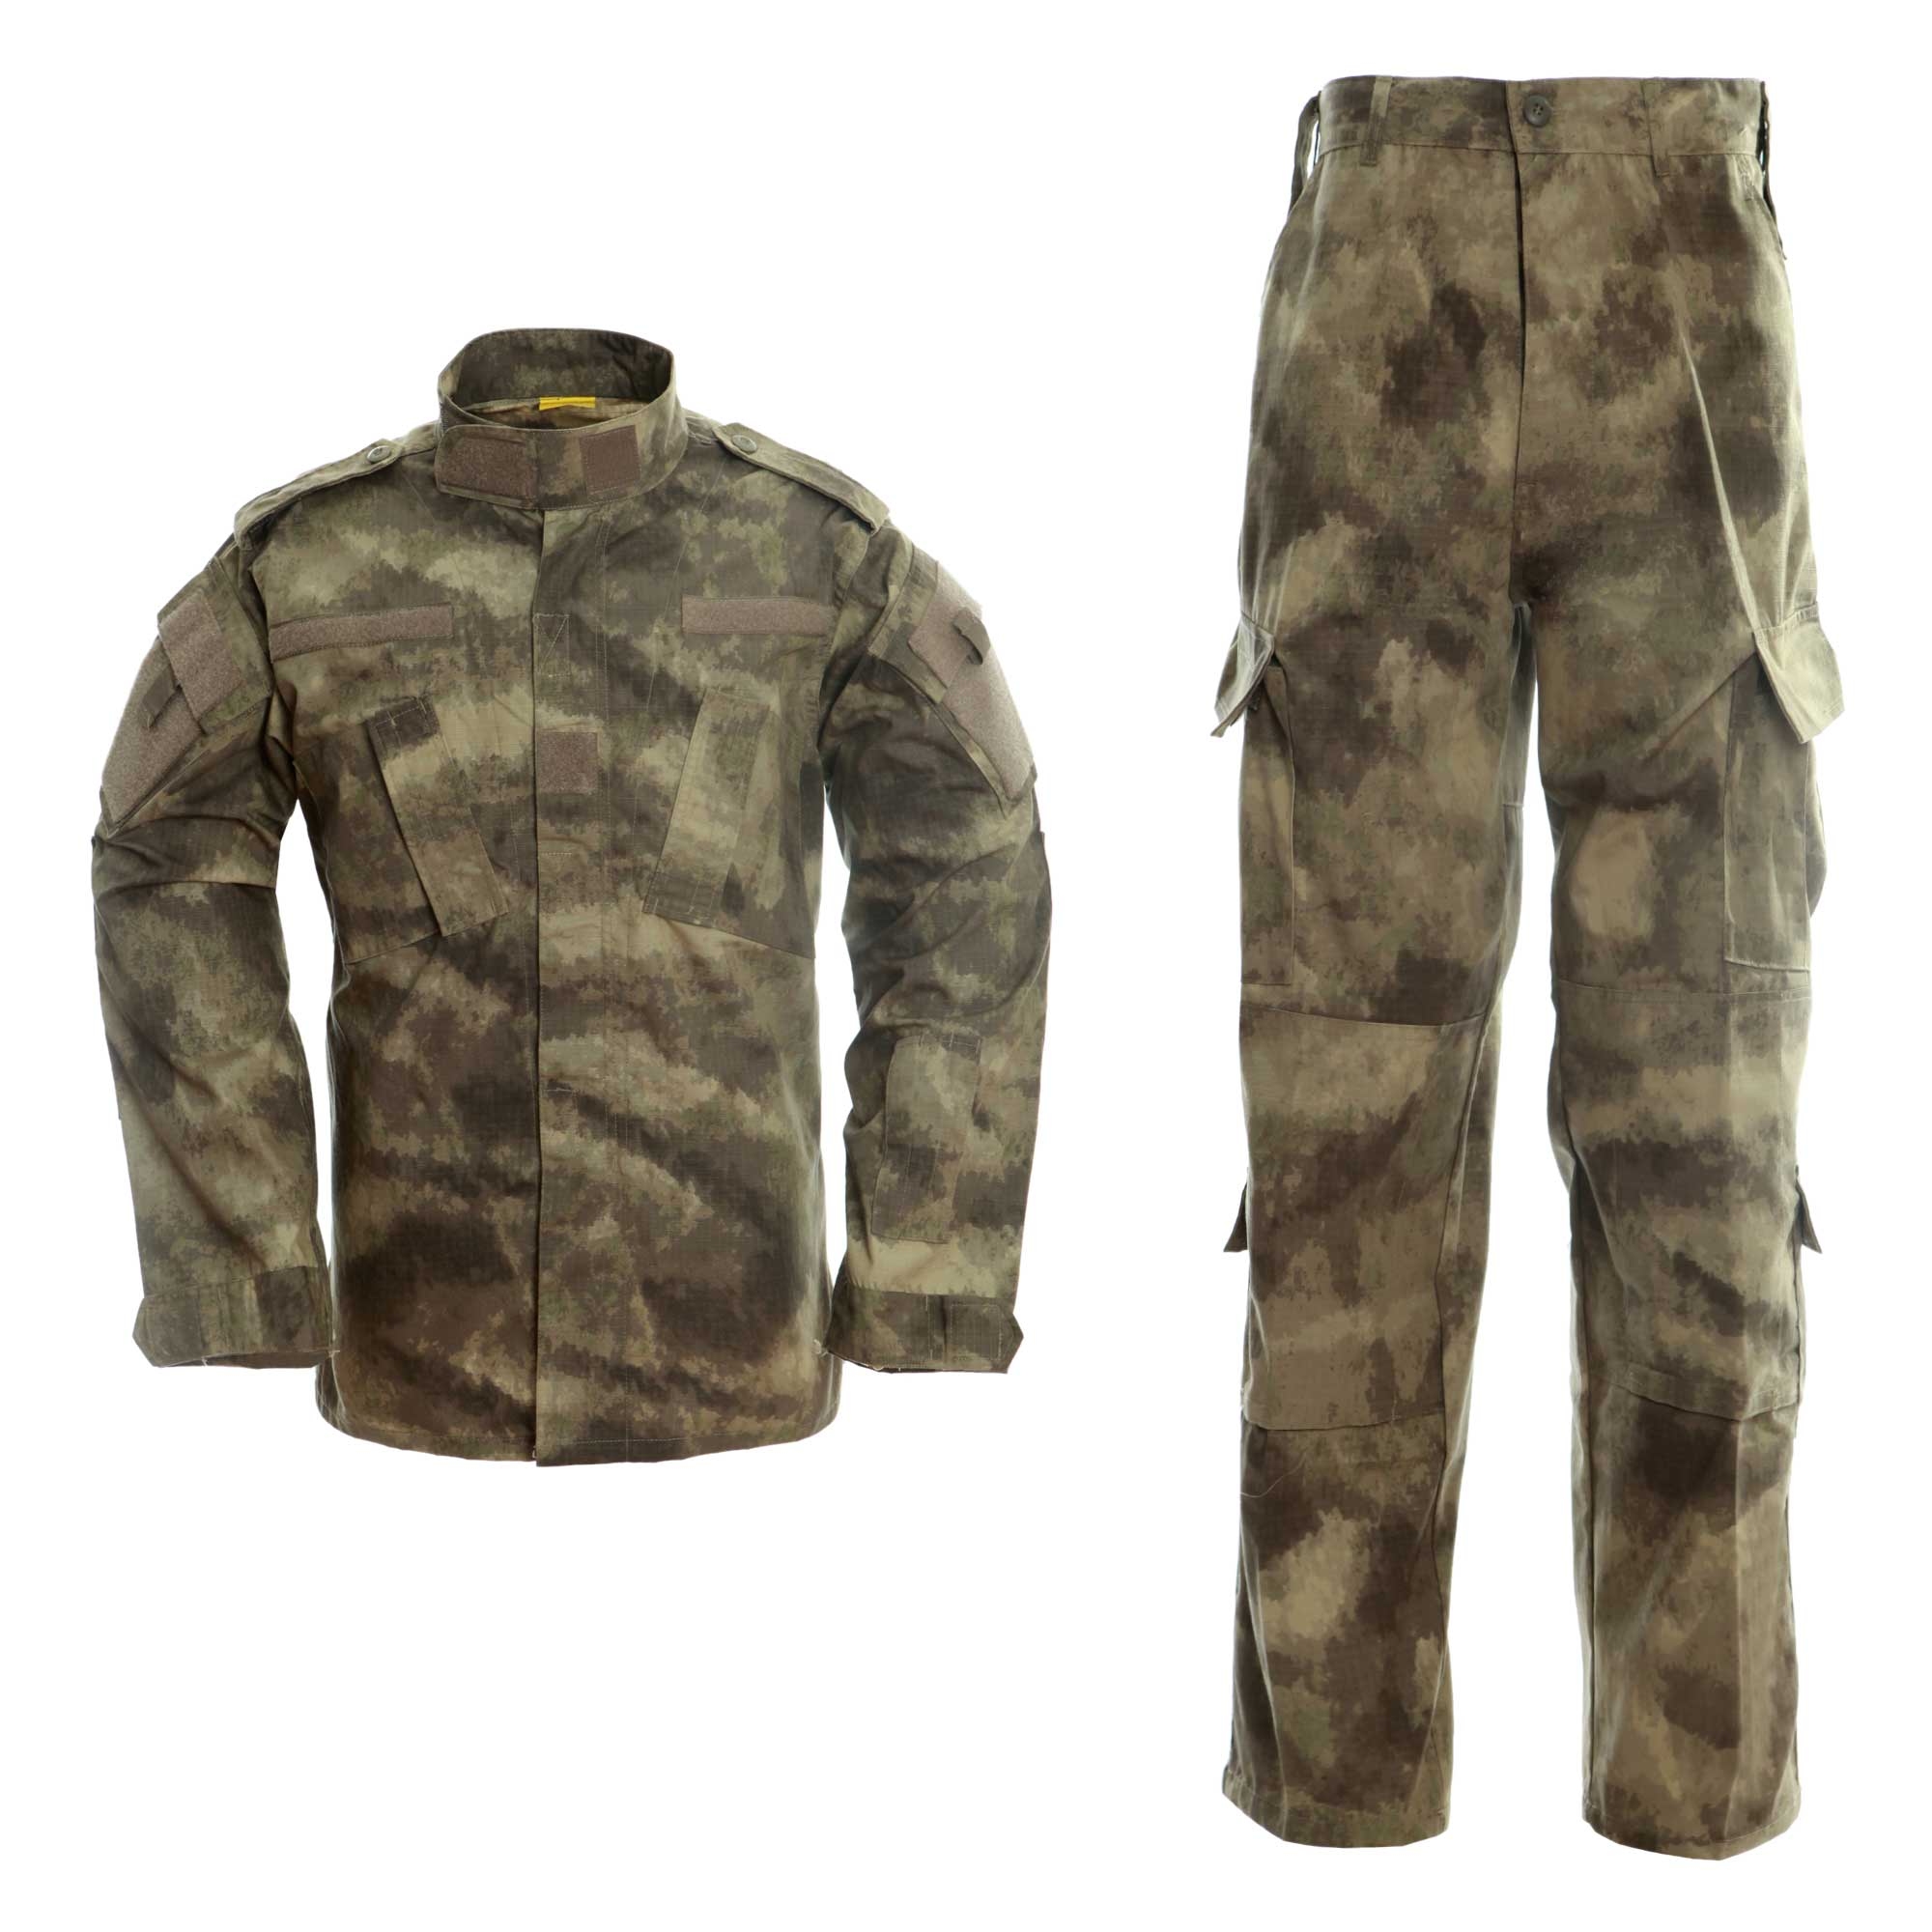 Combat shirt vs BDU, which do you have and why? : r/airsoft